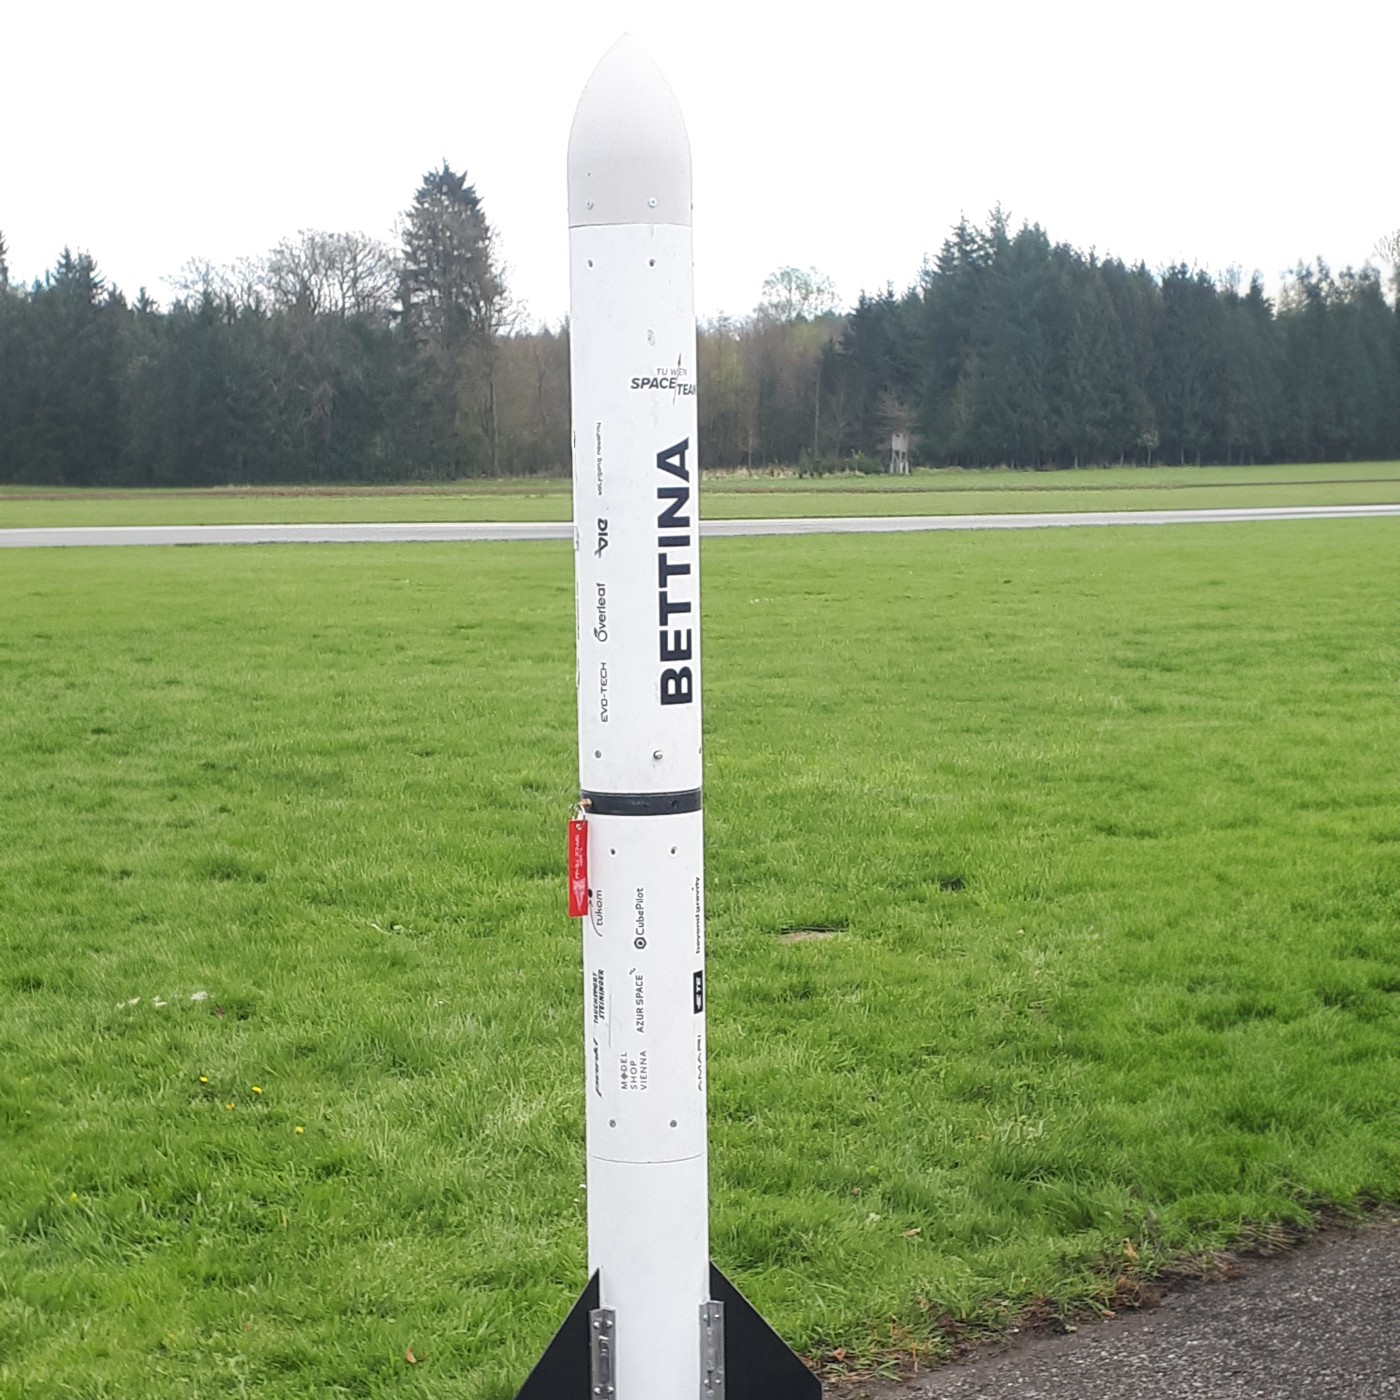 : The rocket “Bettina” has successfully taken off.